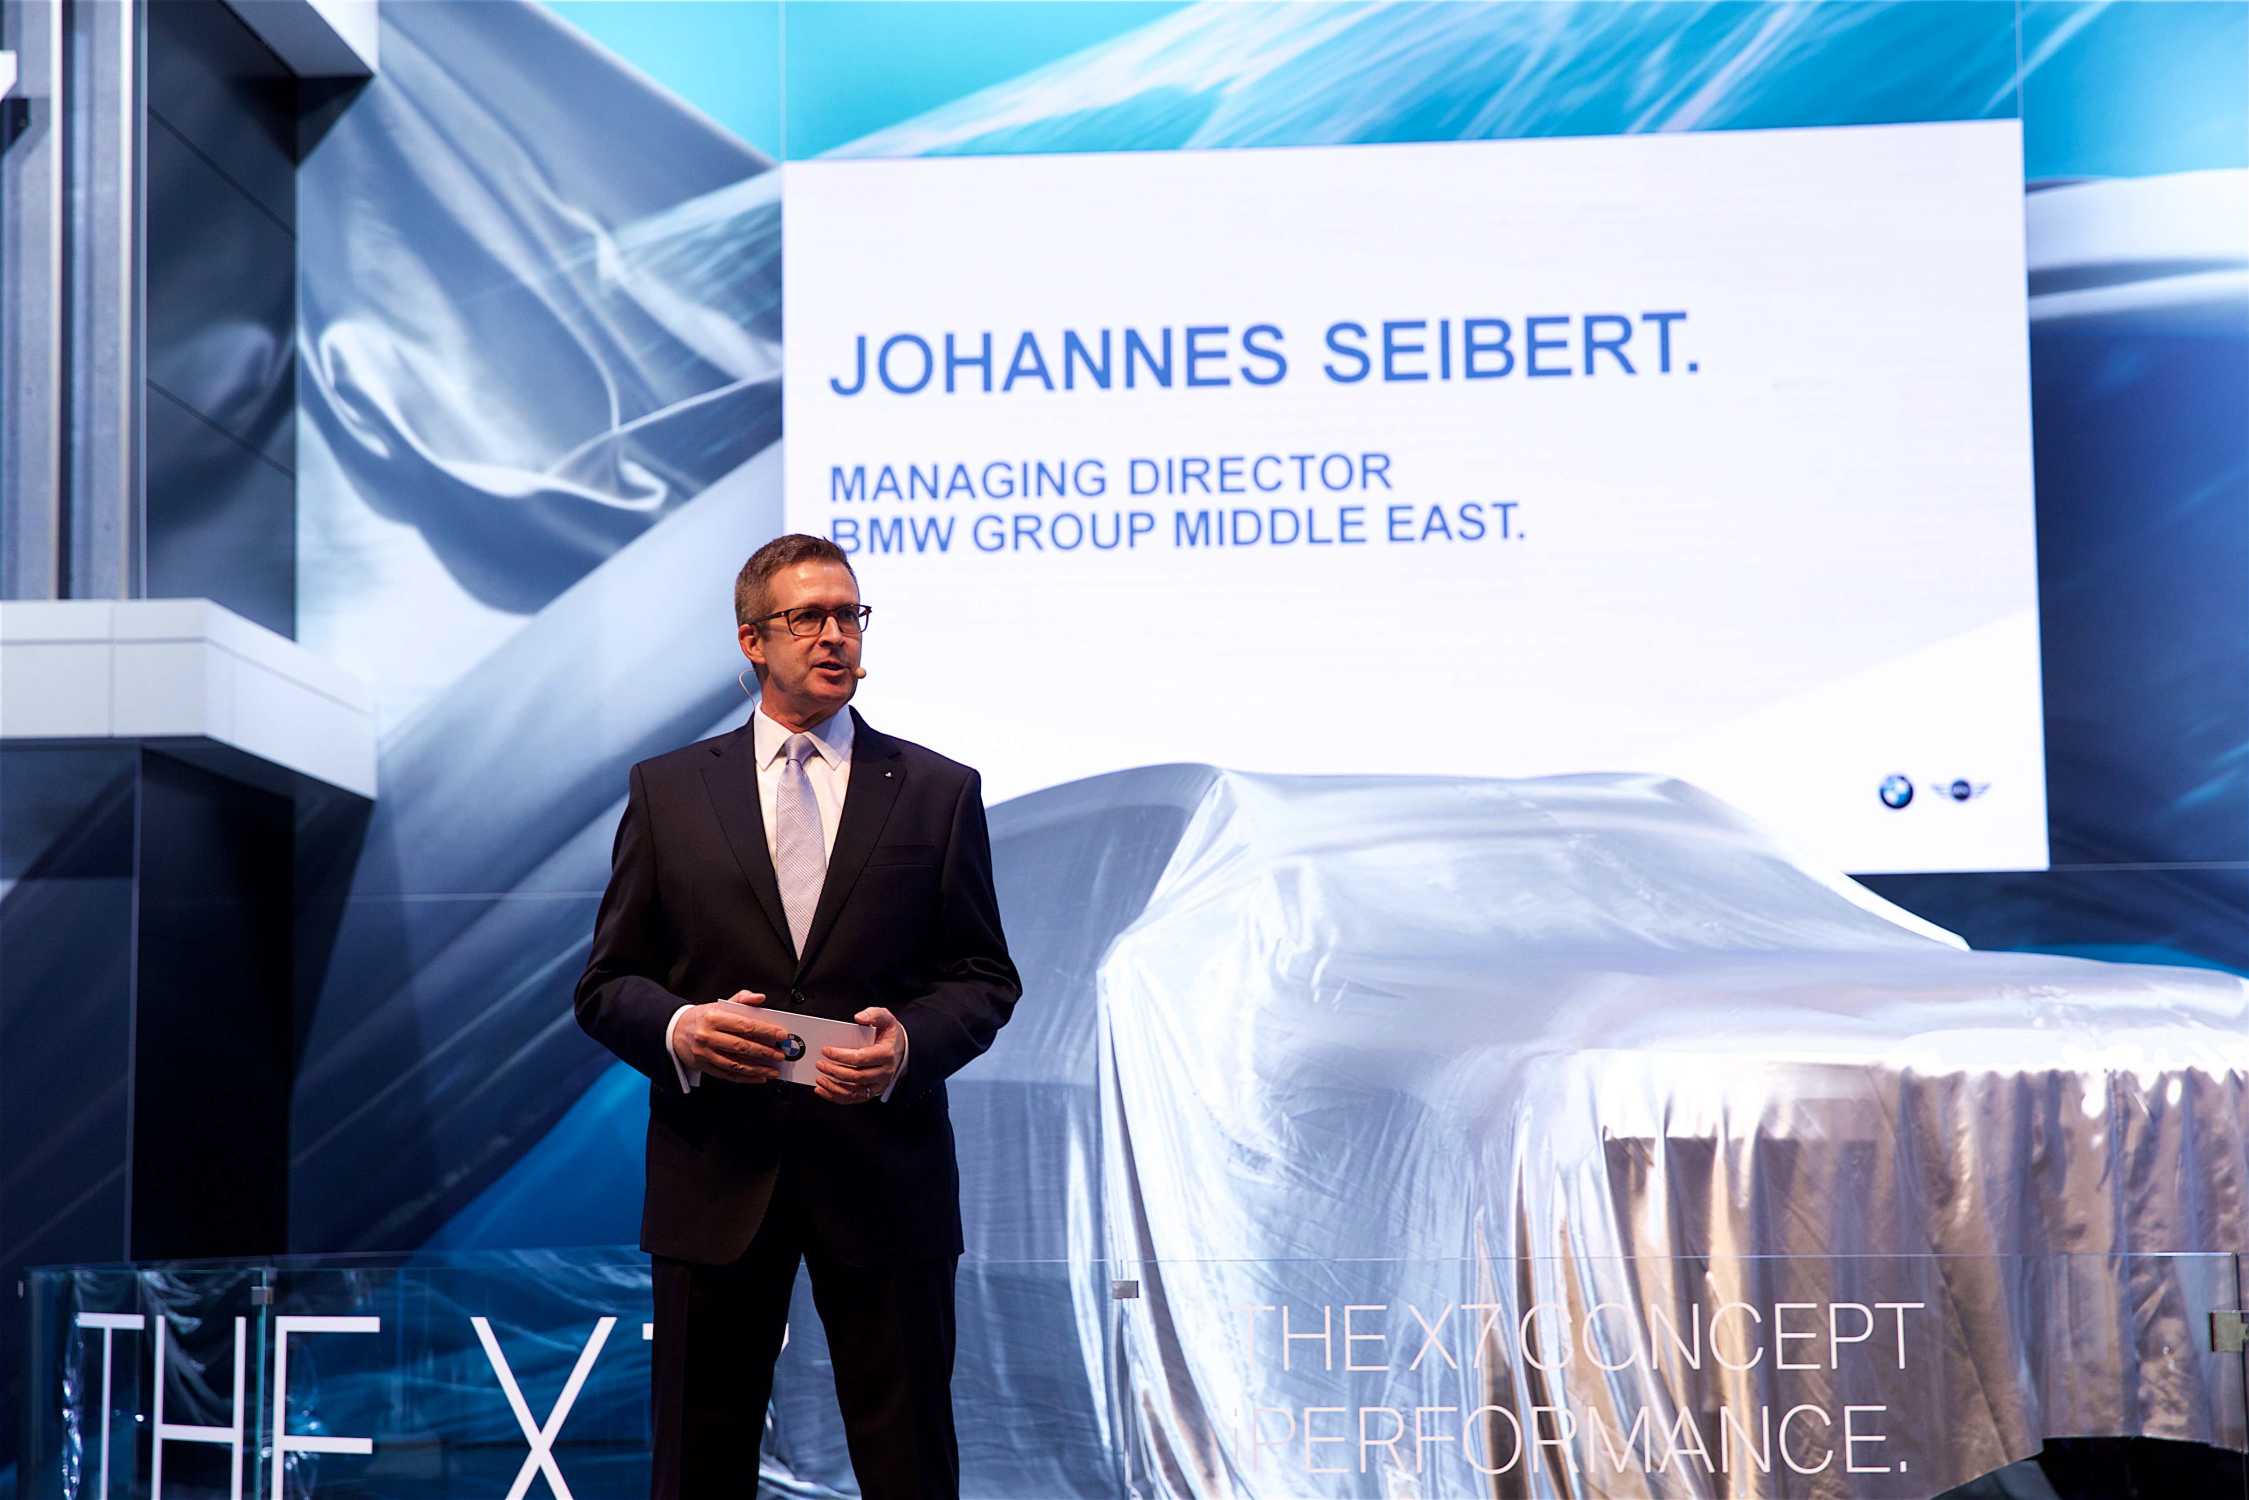 Johannes Seibert Managing Director BMW Middle East at Dubai Motor Show Press Conference 2017 (11/2017)